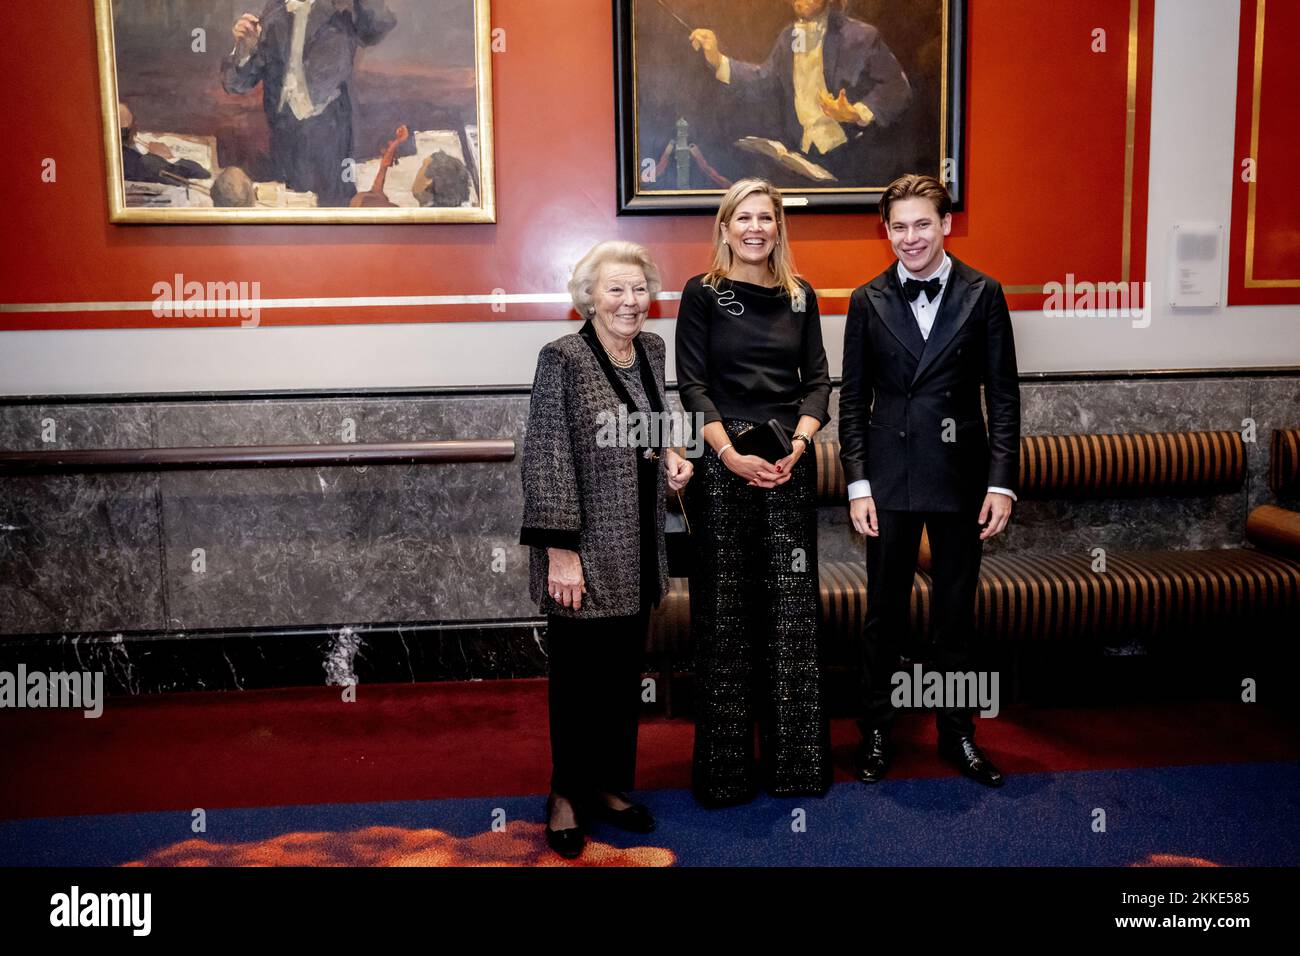 Amsterdam, Netherlands. 25th Nov, 2022. AMSTERDAM - Queen Maxima and Princess Beatrix meet conductor Klaus Makela in the conductor's foyer of the Concertgebouw. They visited a concert by the Royal Concertgebouw Orchestra, conducted by the 26-year-old future chief conductor. Queen Maxima is the patroness of the orchestra. ANP ROBIN UTRECHT netherlands out - belgium out Credit: ANP/Alamy Live News Stock Photo